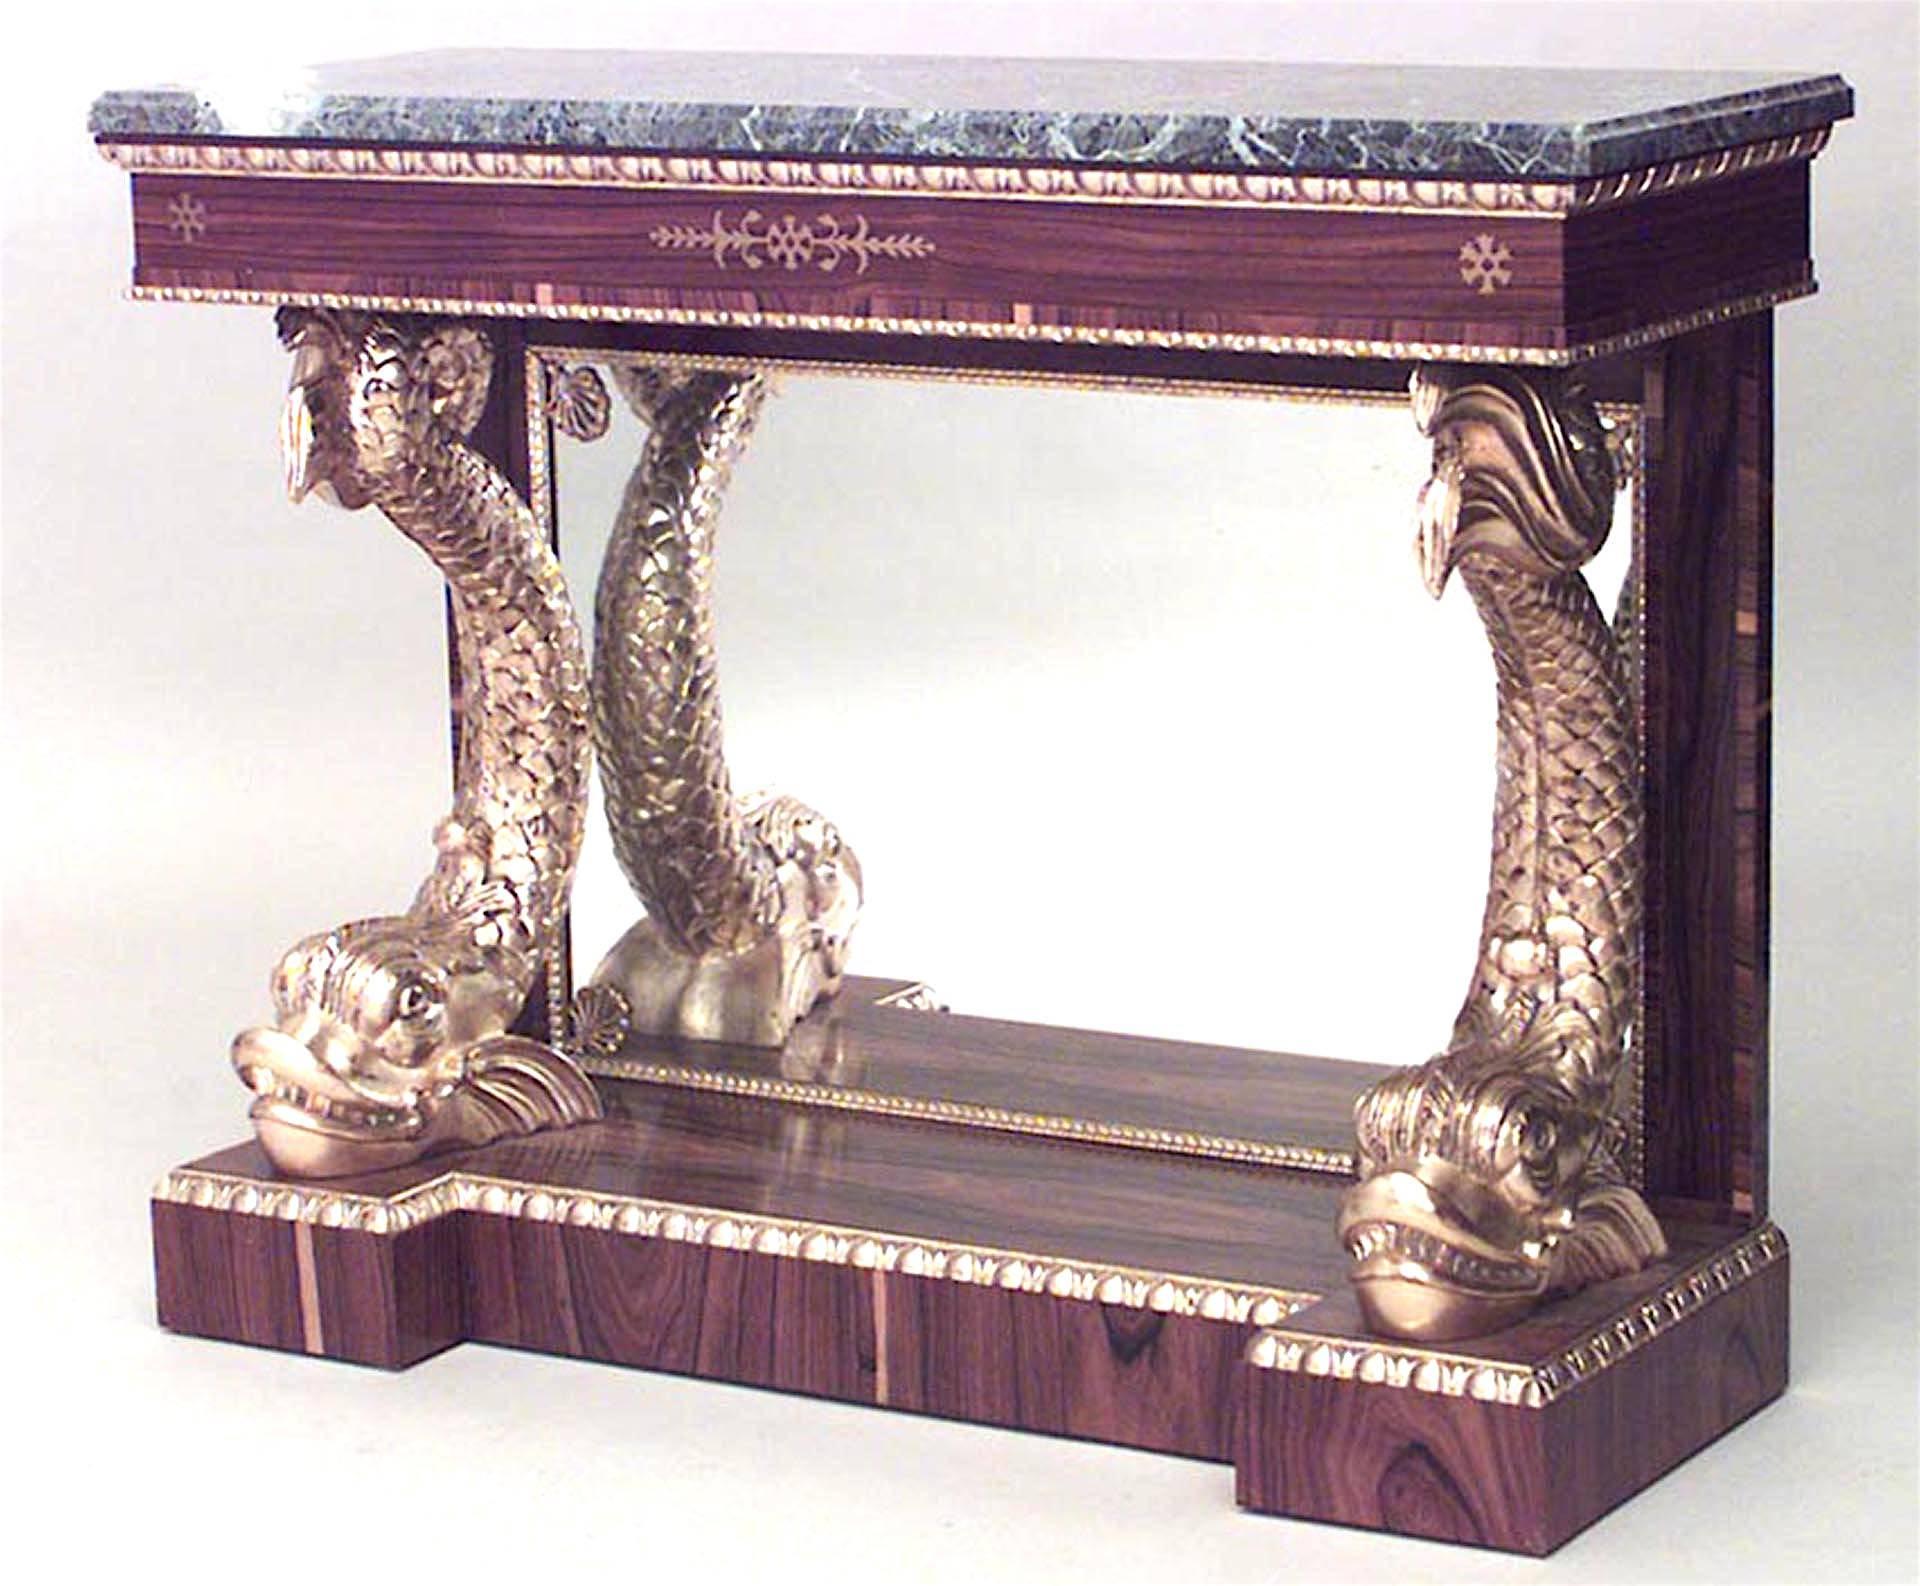 Pair of English Regency-style rosewood console tables with brass inlaid front apron supporting two gilt carved dolphins resting on platform base with mirror back and marble top. (Related item: 056500C) (PRICED AS Pair)
